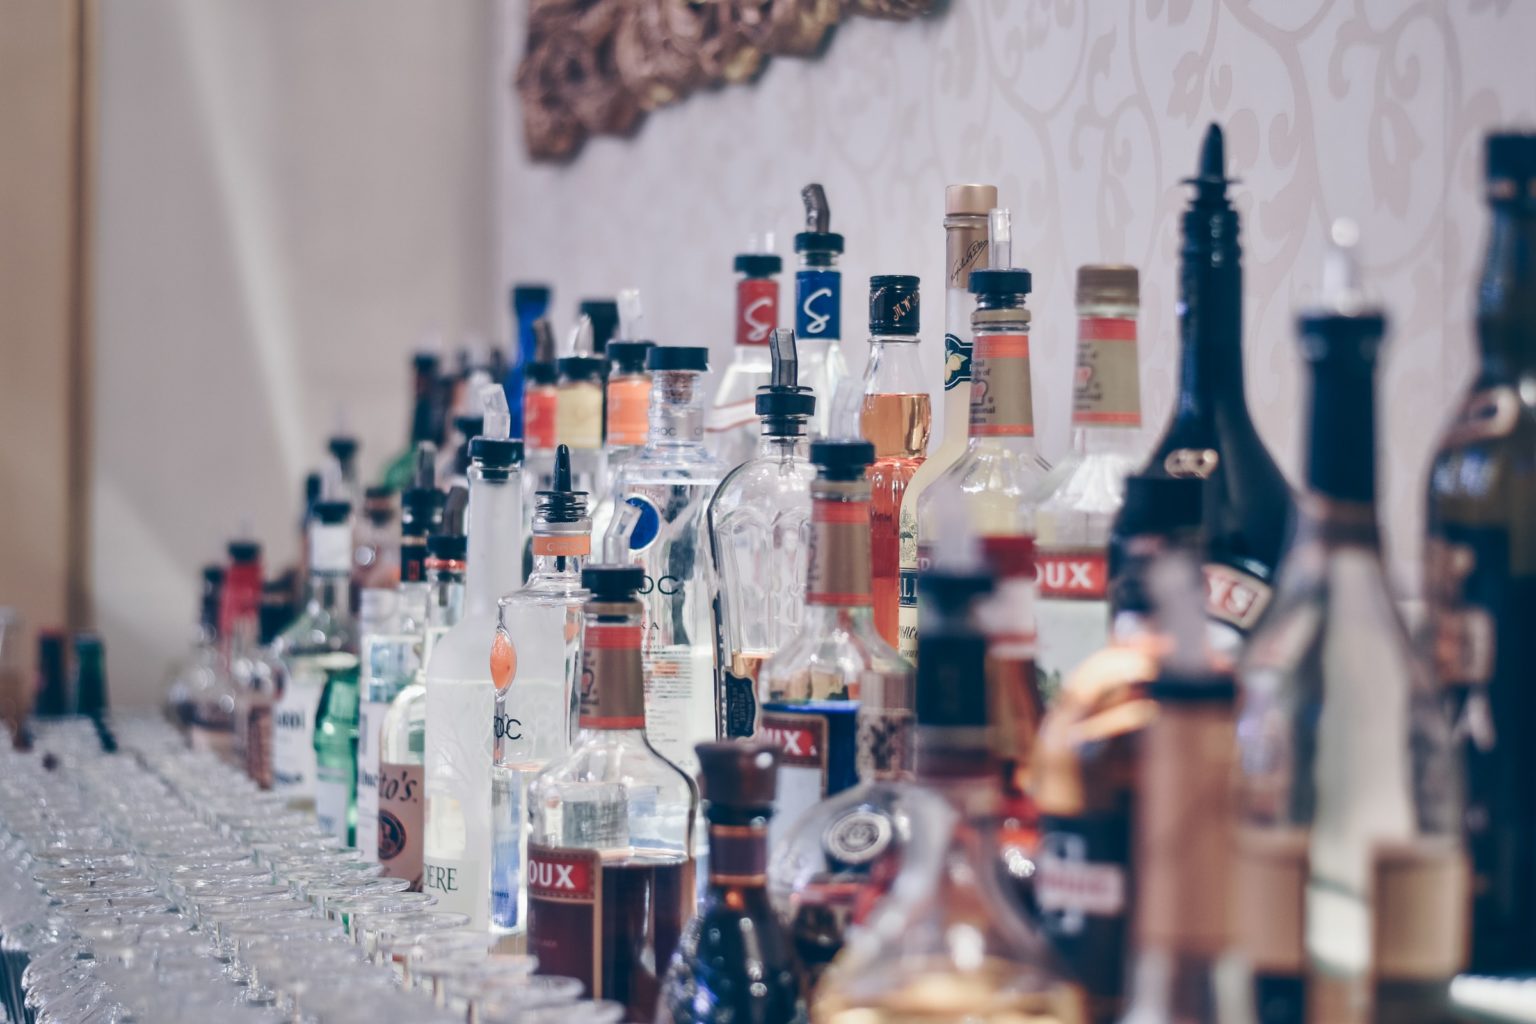 Bottles of alcohol stacked in rows on the back of a bar by a wall. Image by ibrahim-boran on Unsplash.